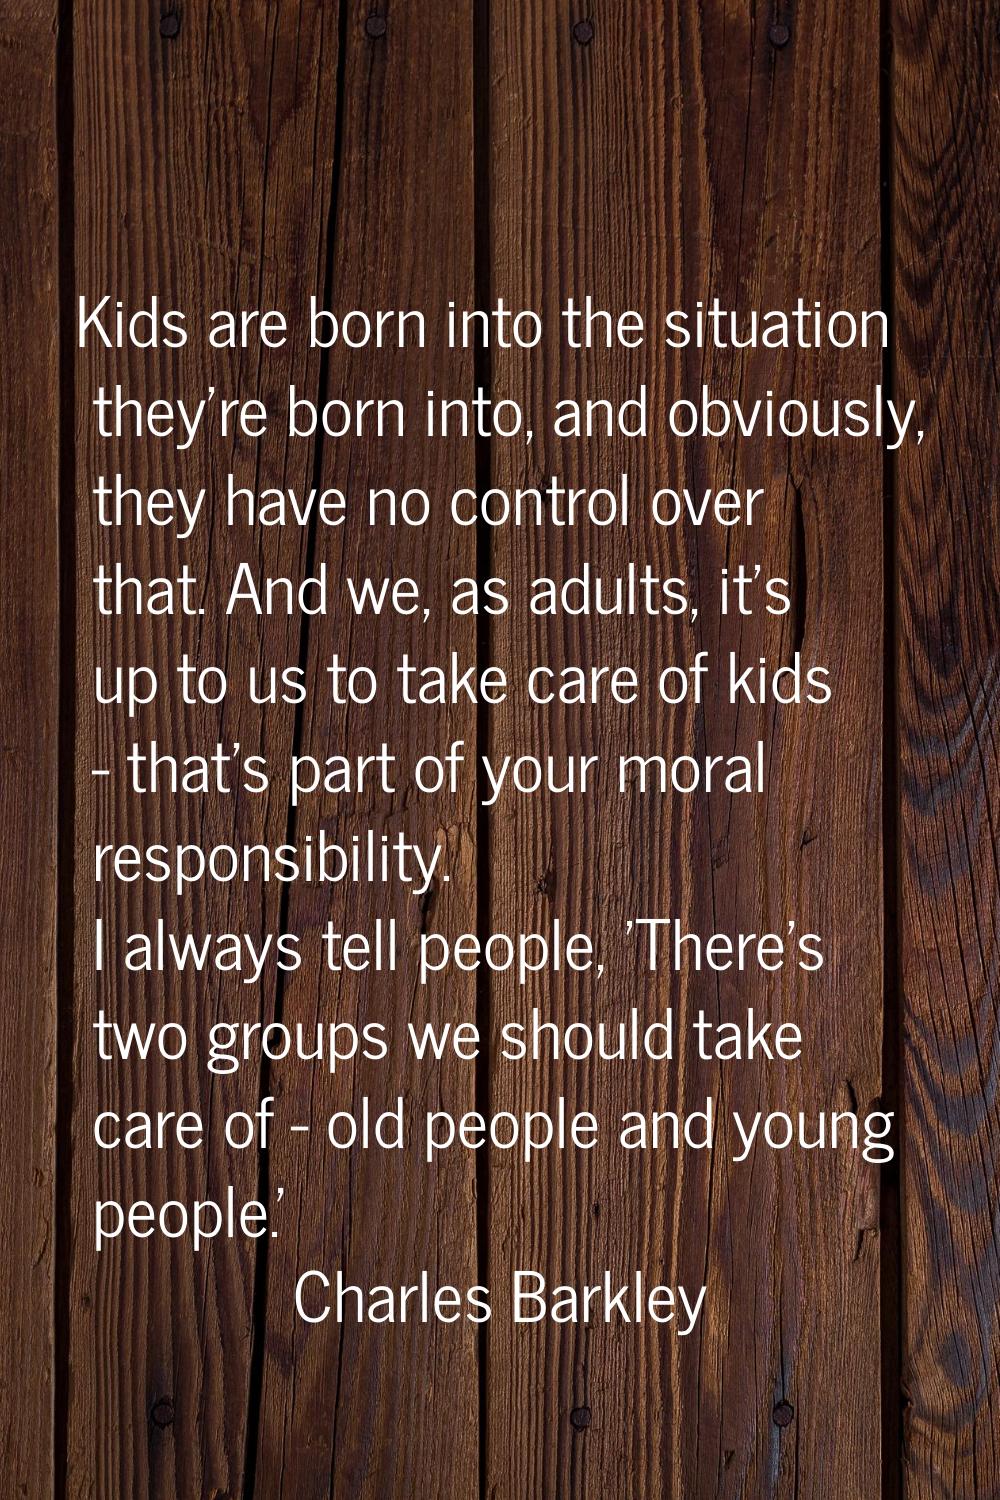 Kids are born into the situation they're born into, and obviously, they have no control over that. 